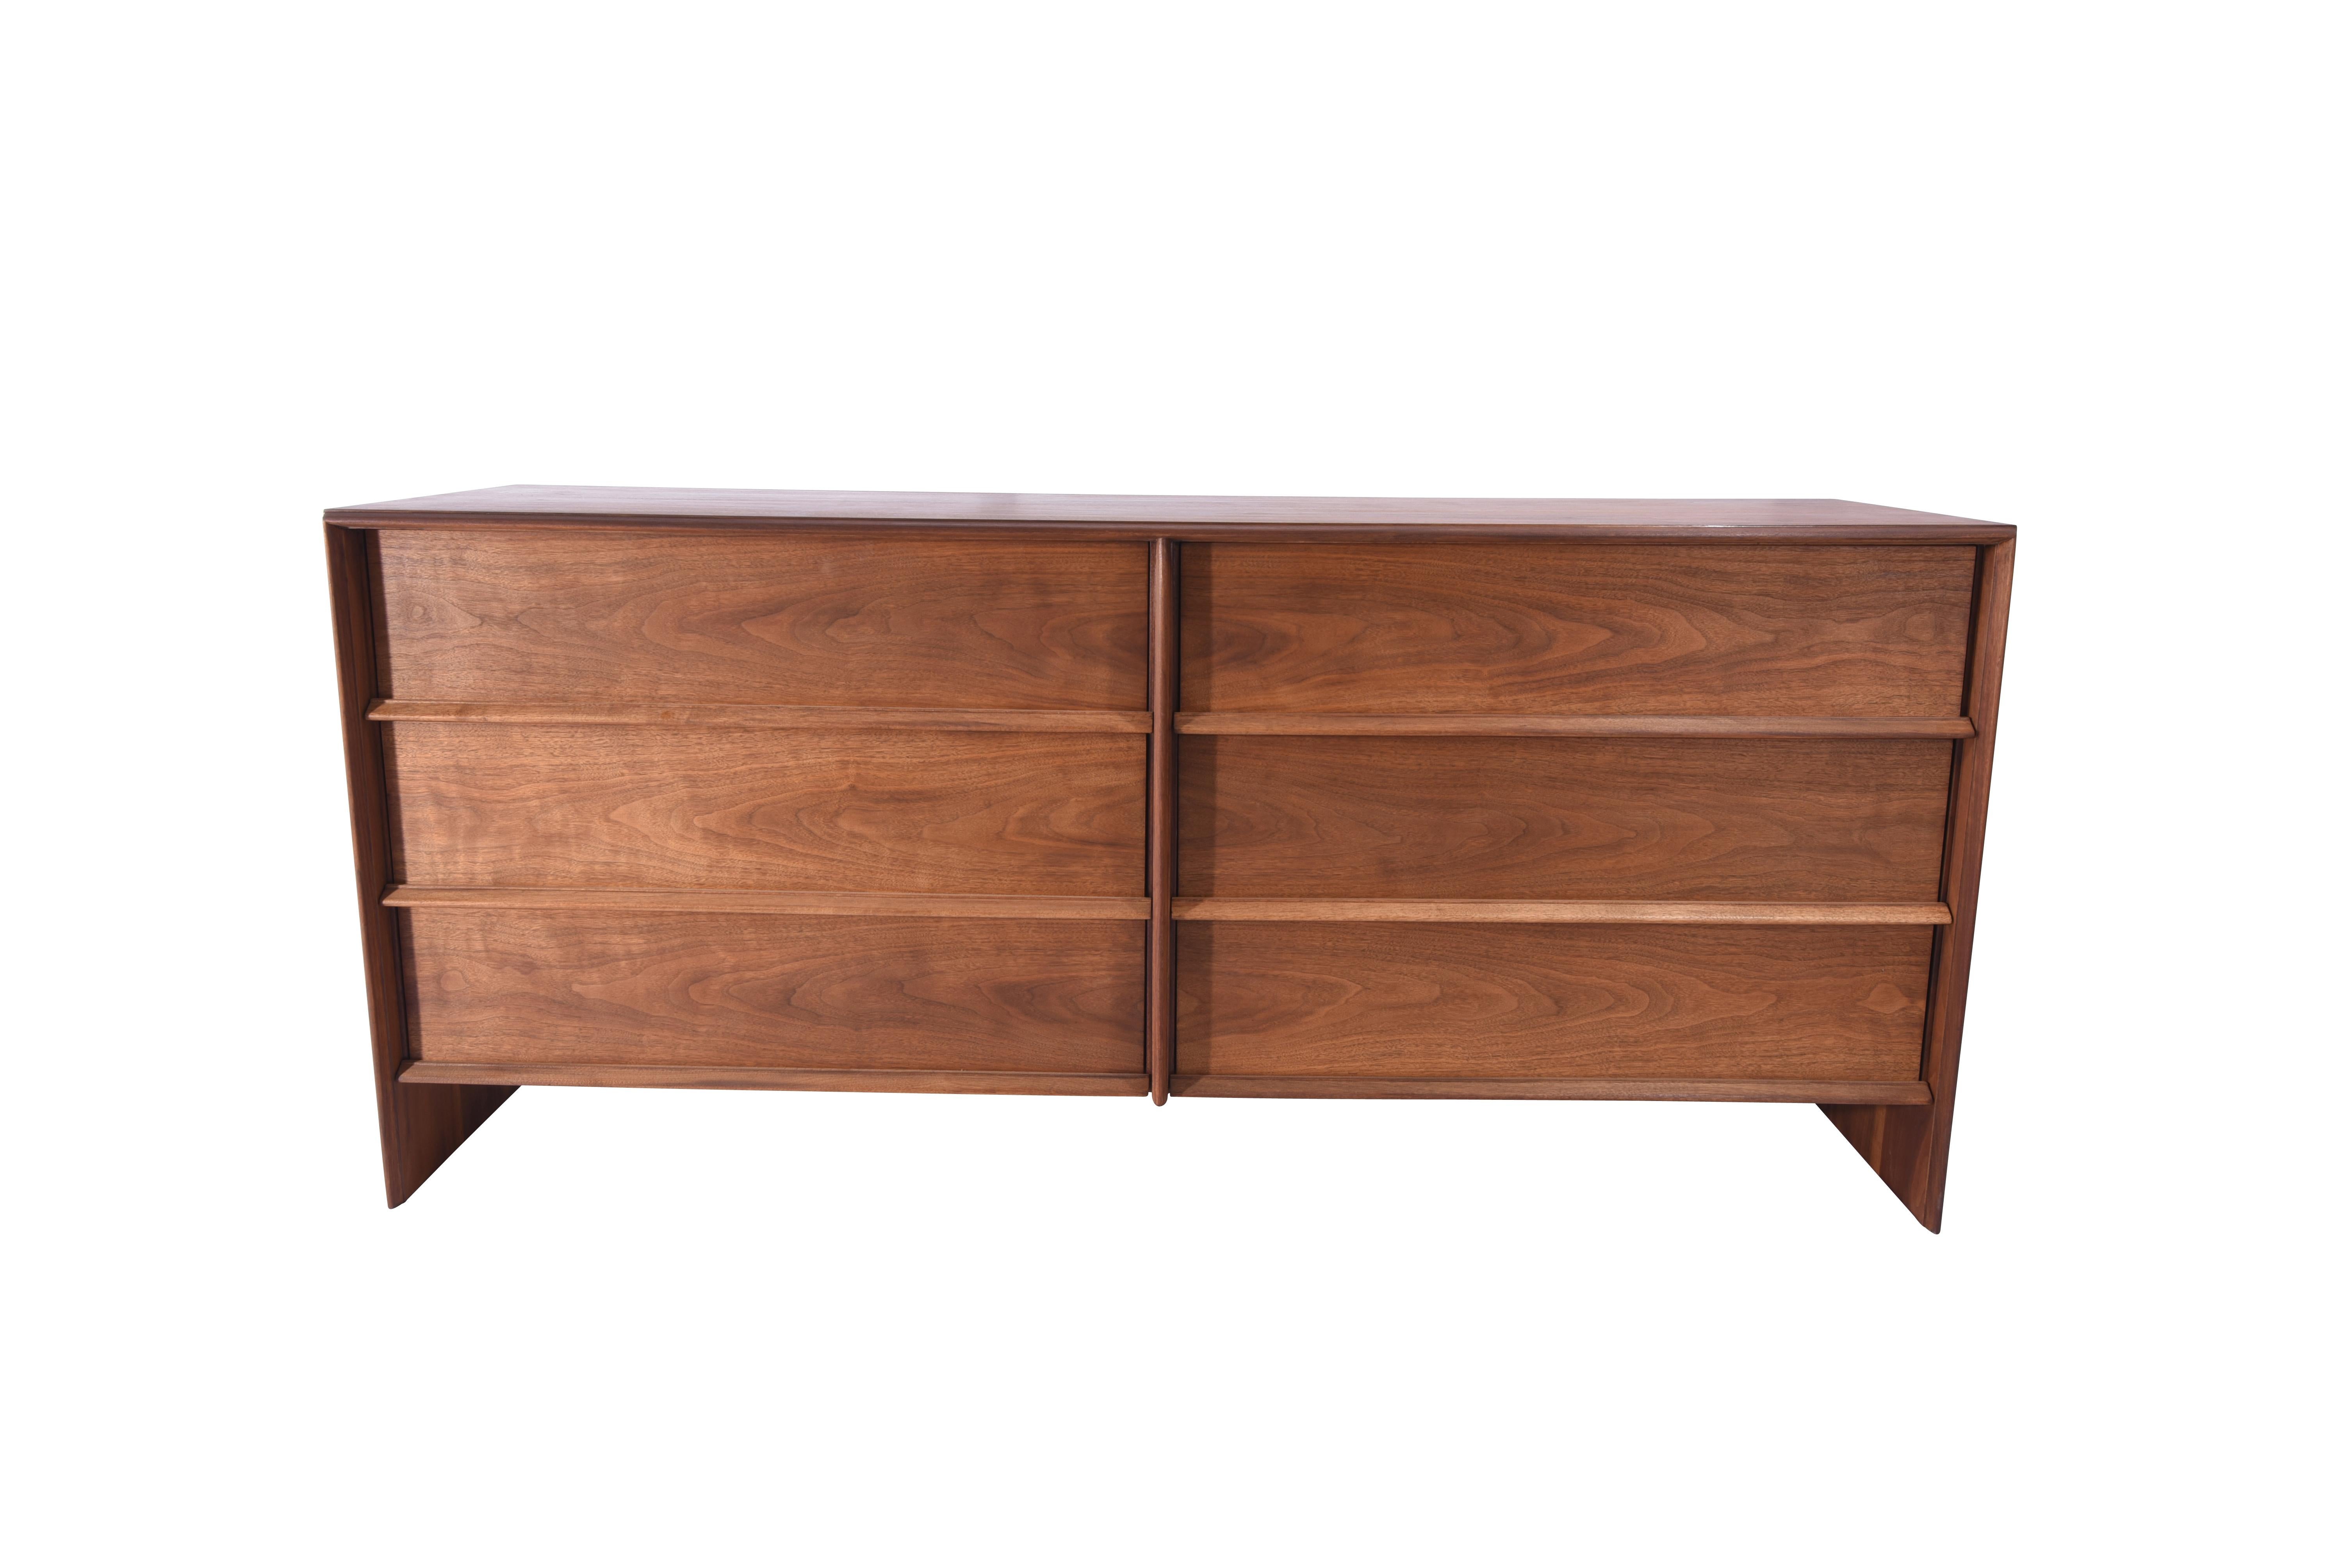 6-drawer dresser by T.H Robsjohn-Gibbings for Widdicomb. Walnut has been fully restored in natural oil rubbed finish. Top 2 drawers on both sides retain the original dividers, and pullout / pull-out trays for smaller items, which are